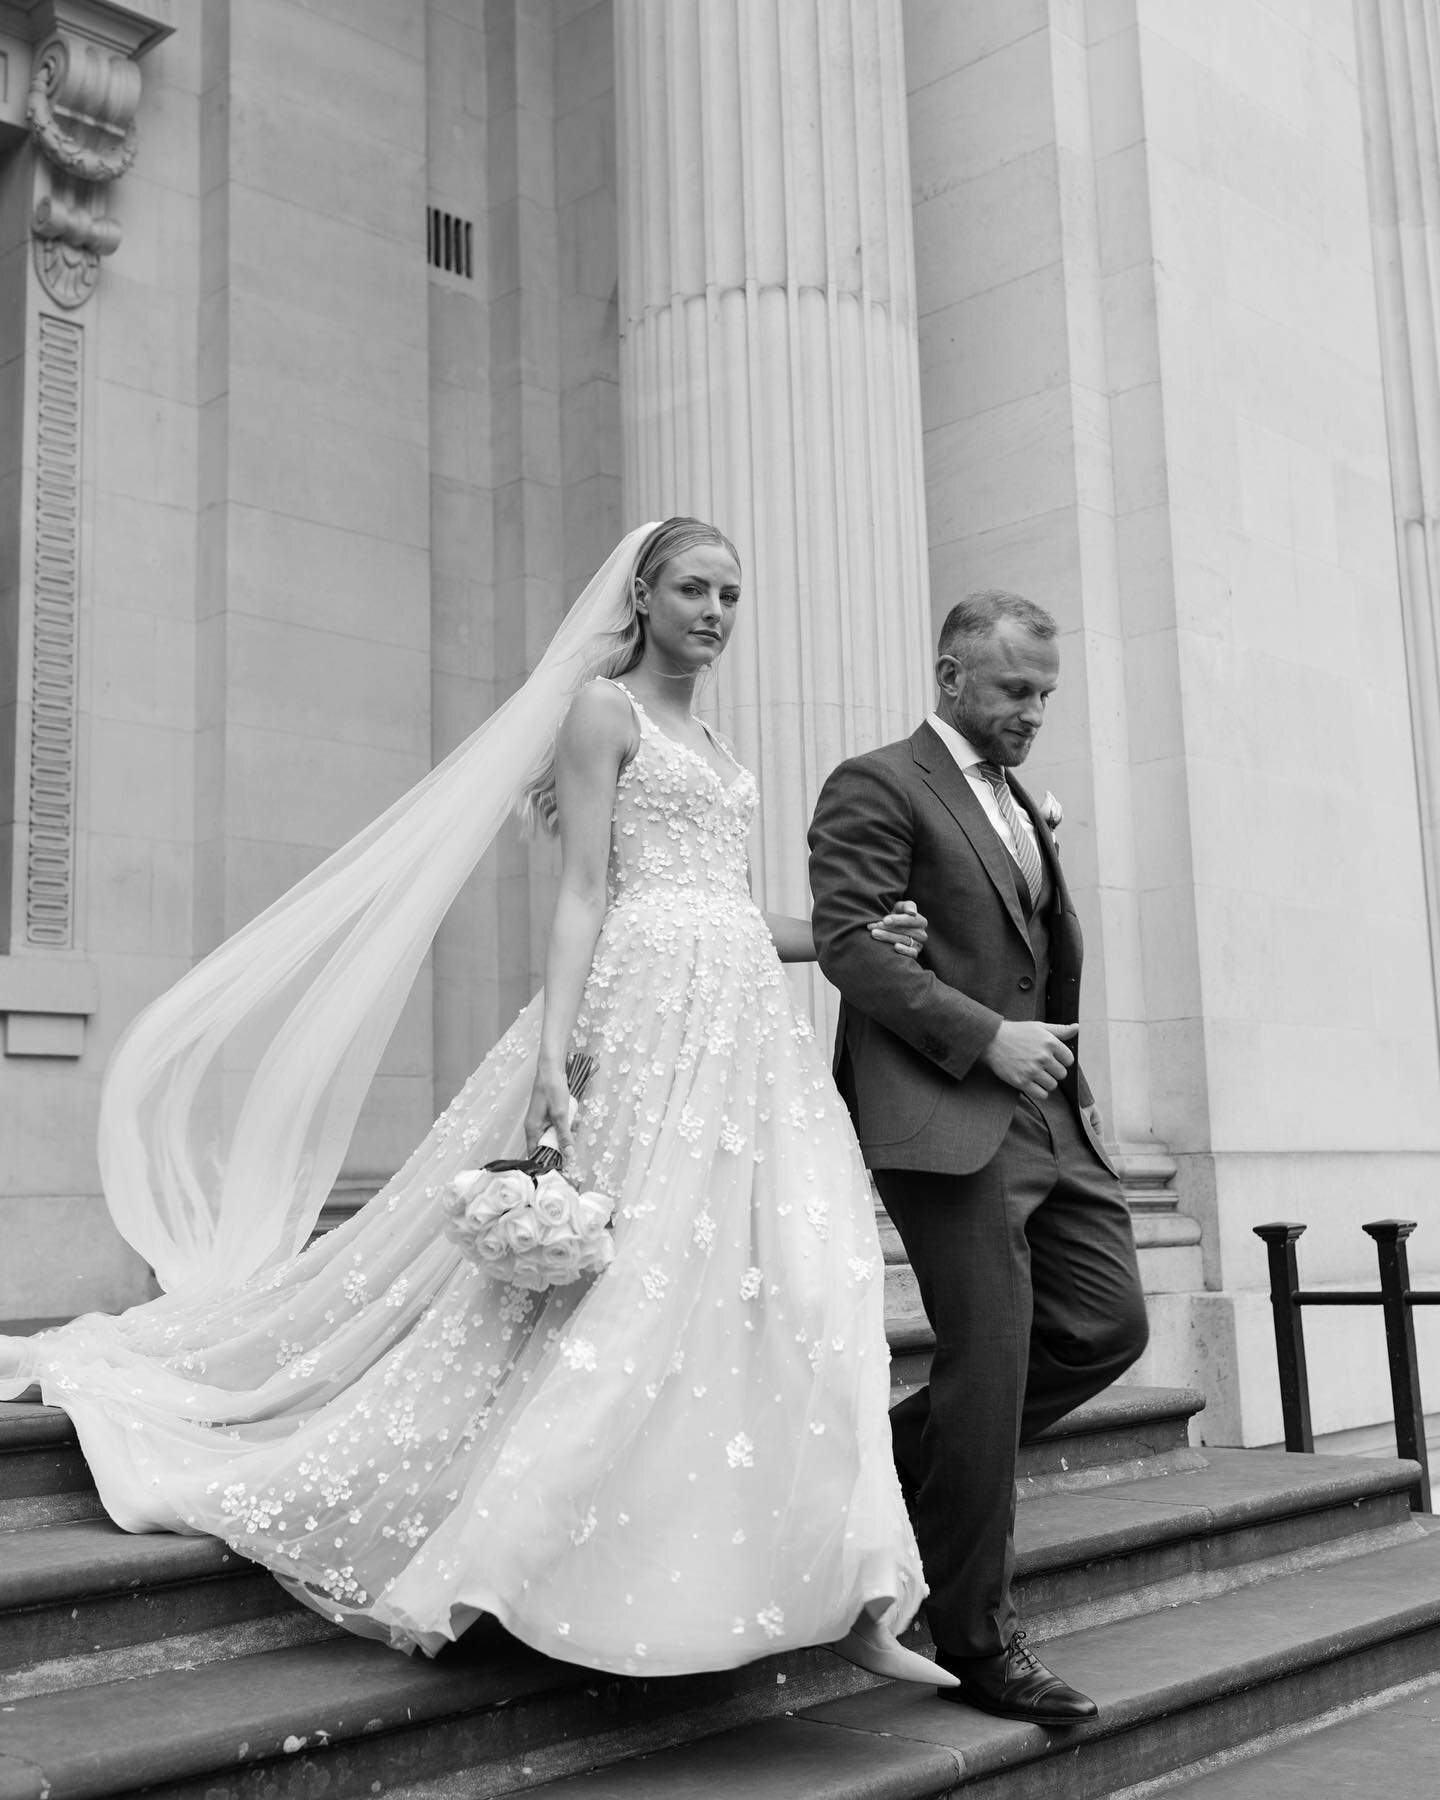 James &amp; Georgia for their intimate affair at The Old Marylebone and evening spent at The Landmark in London
.
#london #londonwedding #londonweddingphotographer #marylebonetownhall #modernbride #togetherjournal #rfpotd #voguebride #fashionbride #f